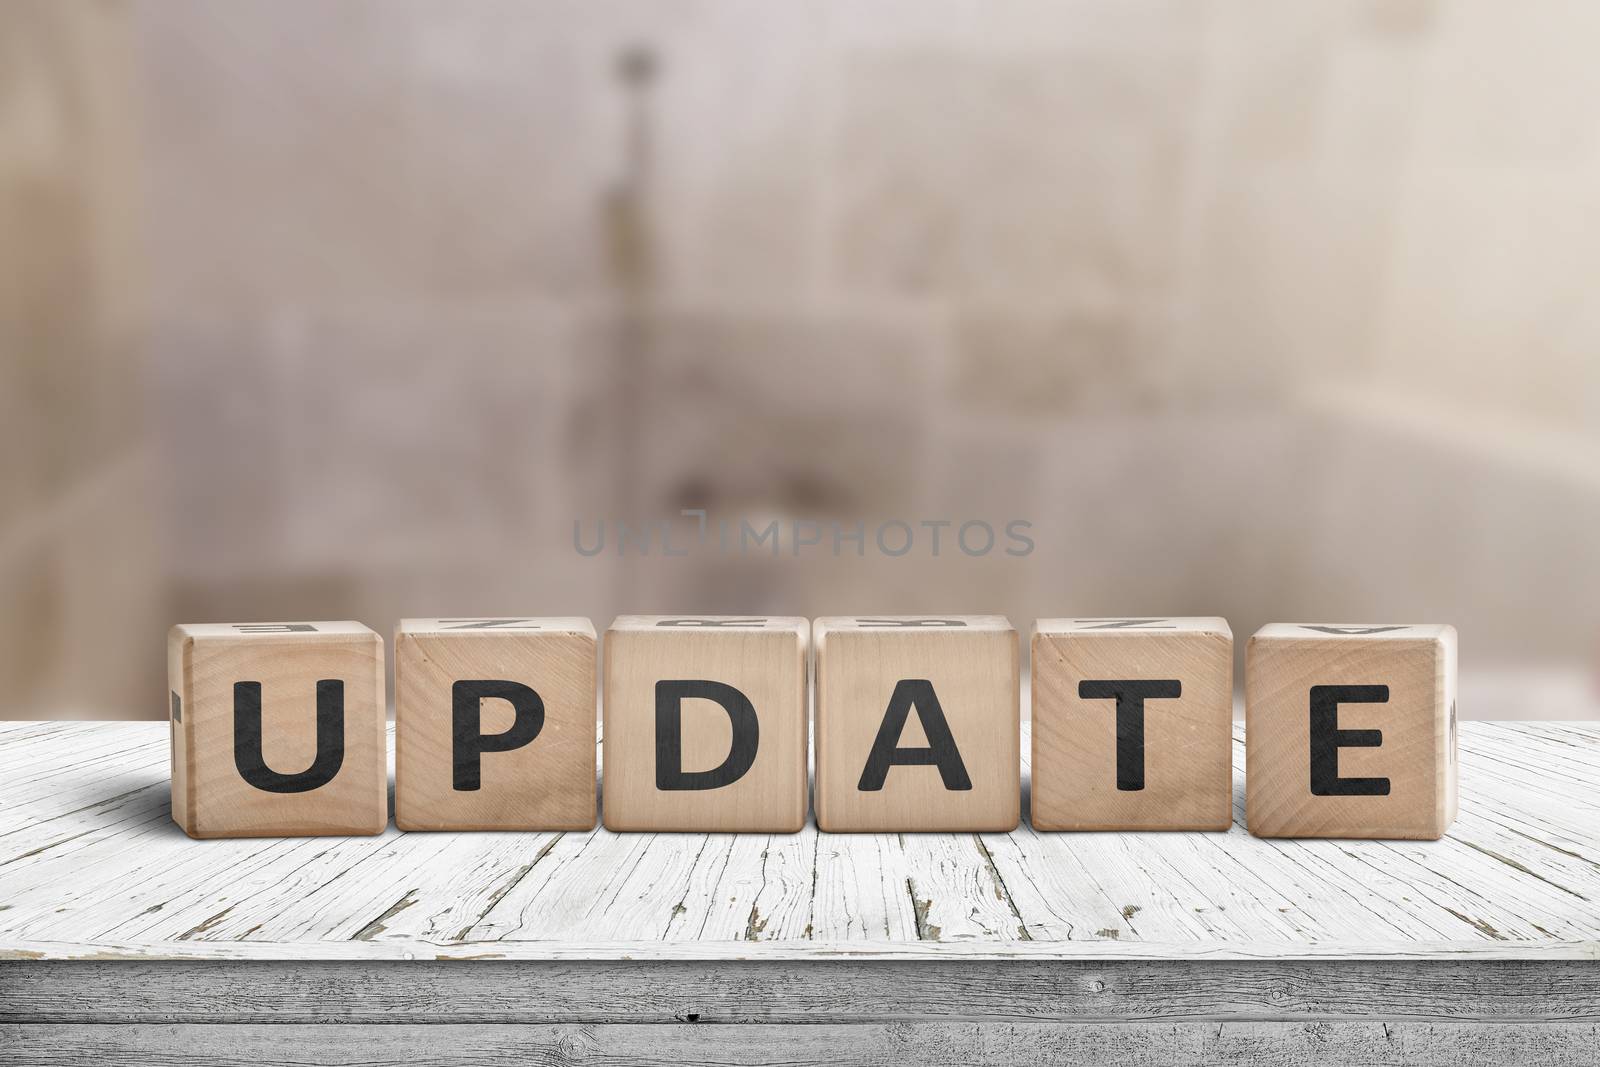 Update message sign on a wooden desk in a room with a blurry background